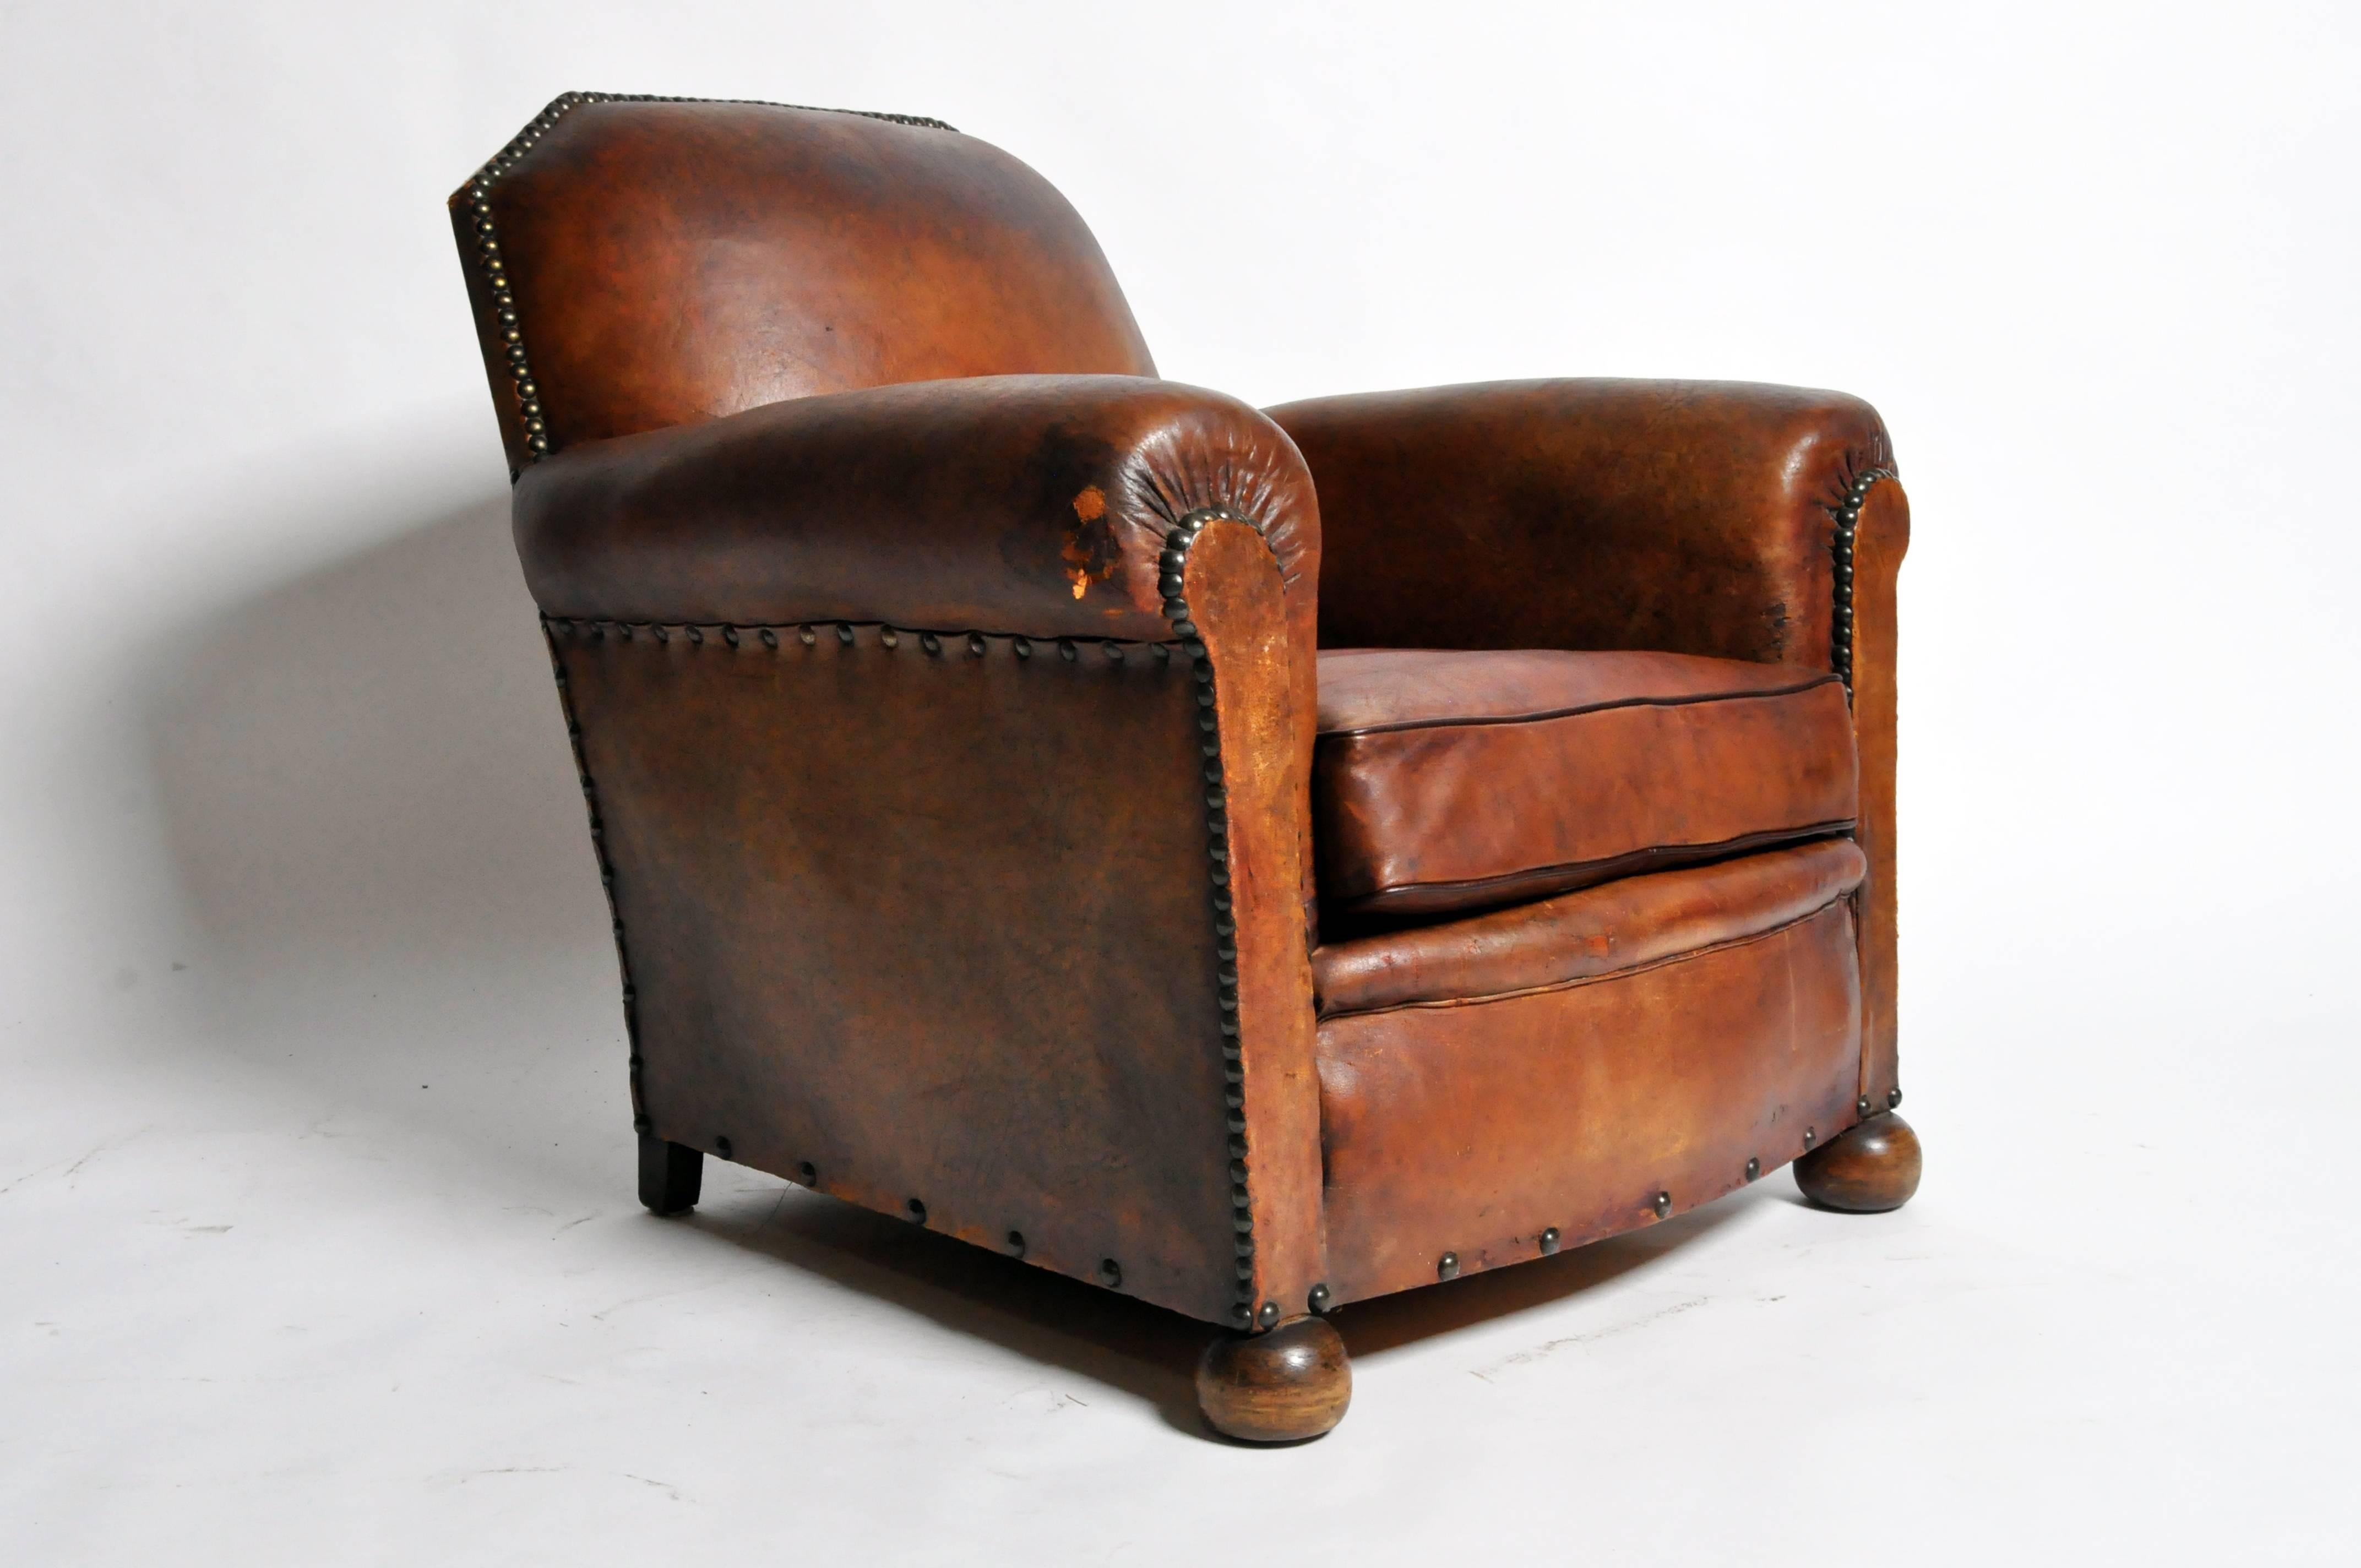 This handsome Art Deco leather chair is from Paris, France and was made from leather, c. 1940. The chair features its original leather and a beautifully aged patina. 

Additional Dimensions: 22.5" Seat Width, 23.5" Seat Depth, 25" Arm